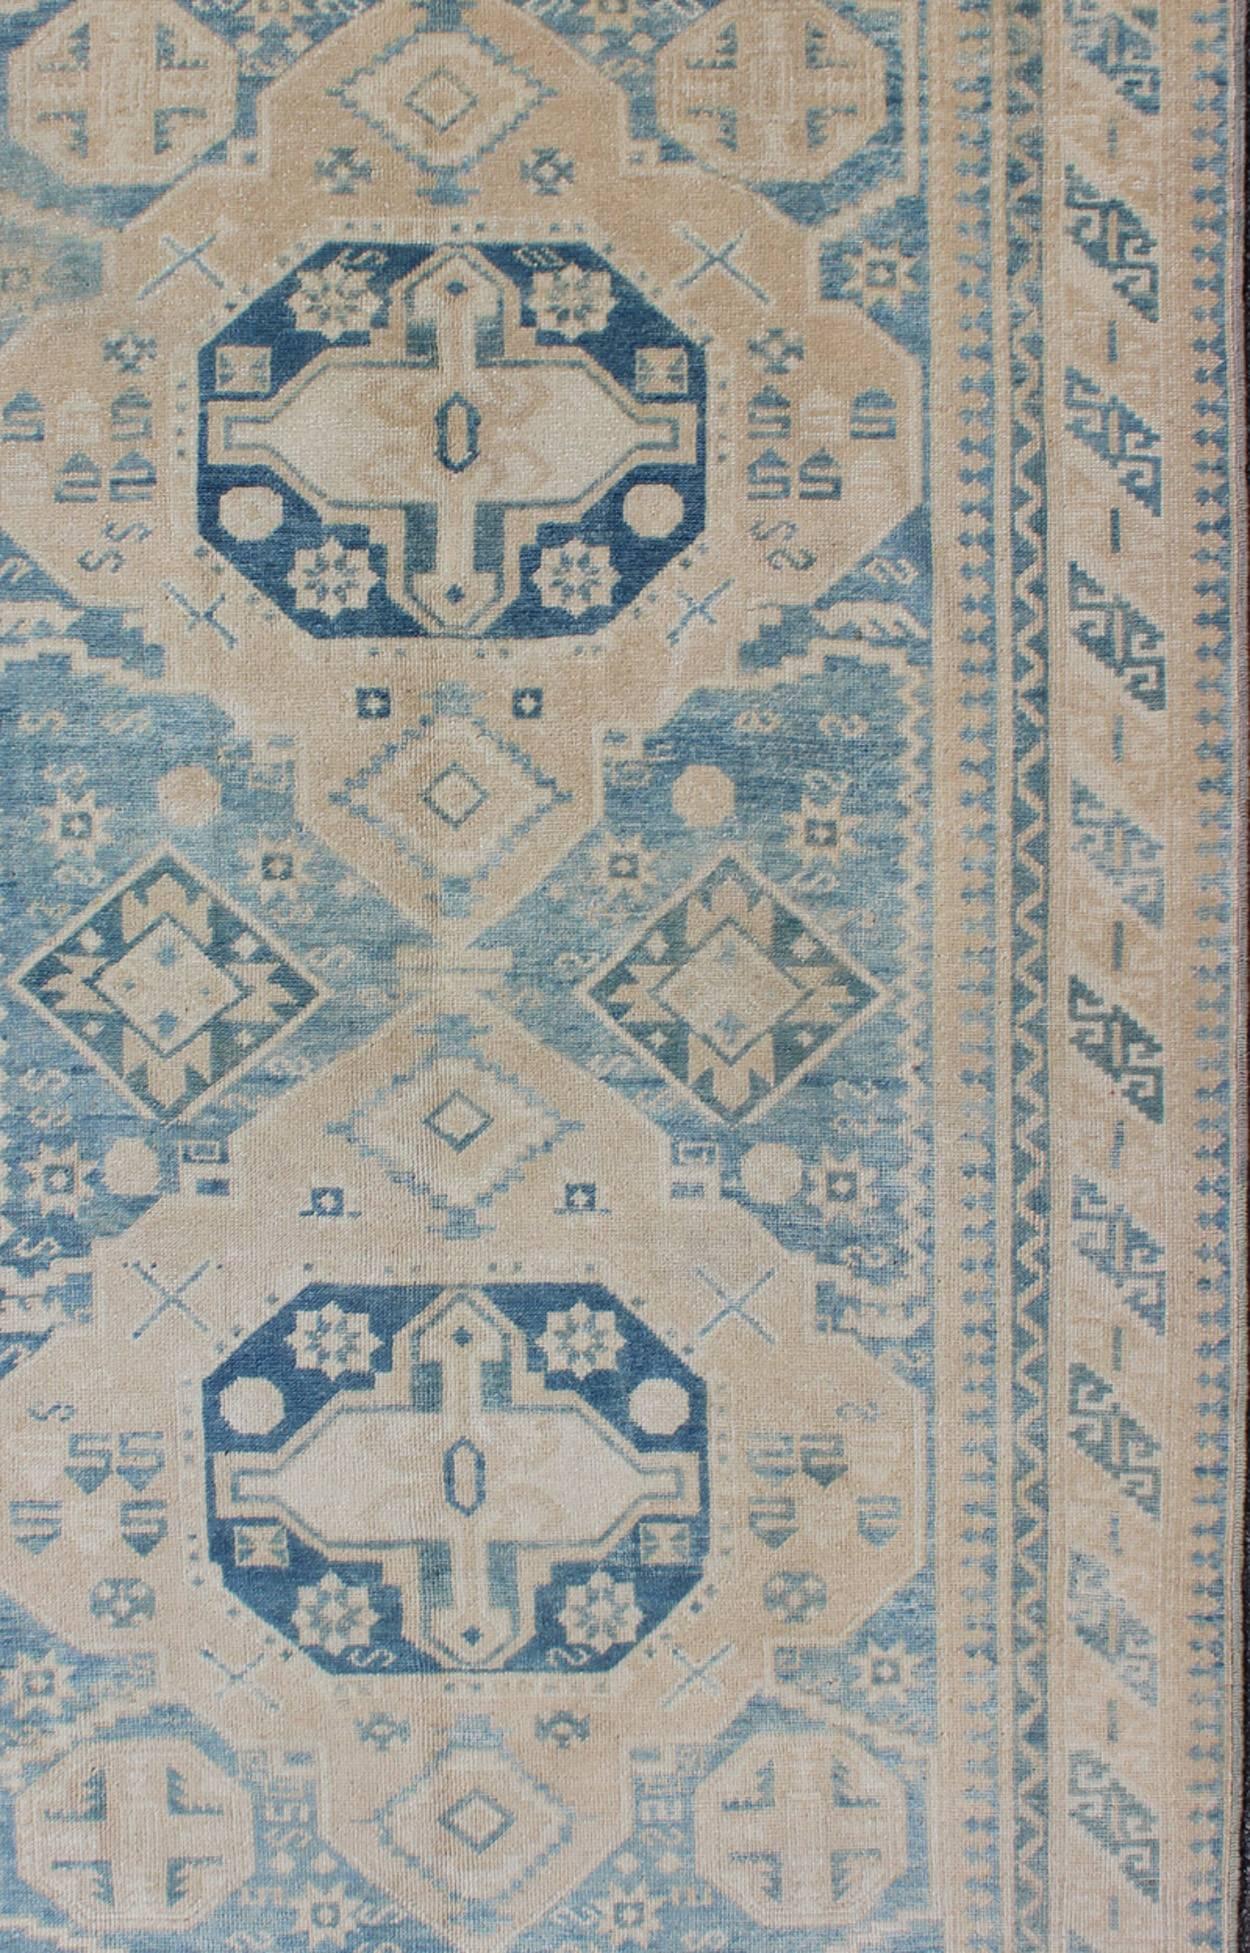 Blue and Tan Vintage Turkish Oushak Rug with Geometric Dual Medallions In Excellent Condition For Sale In Atlanta, GA